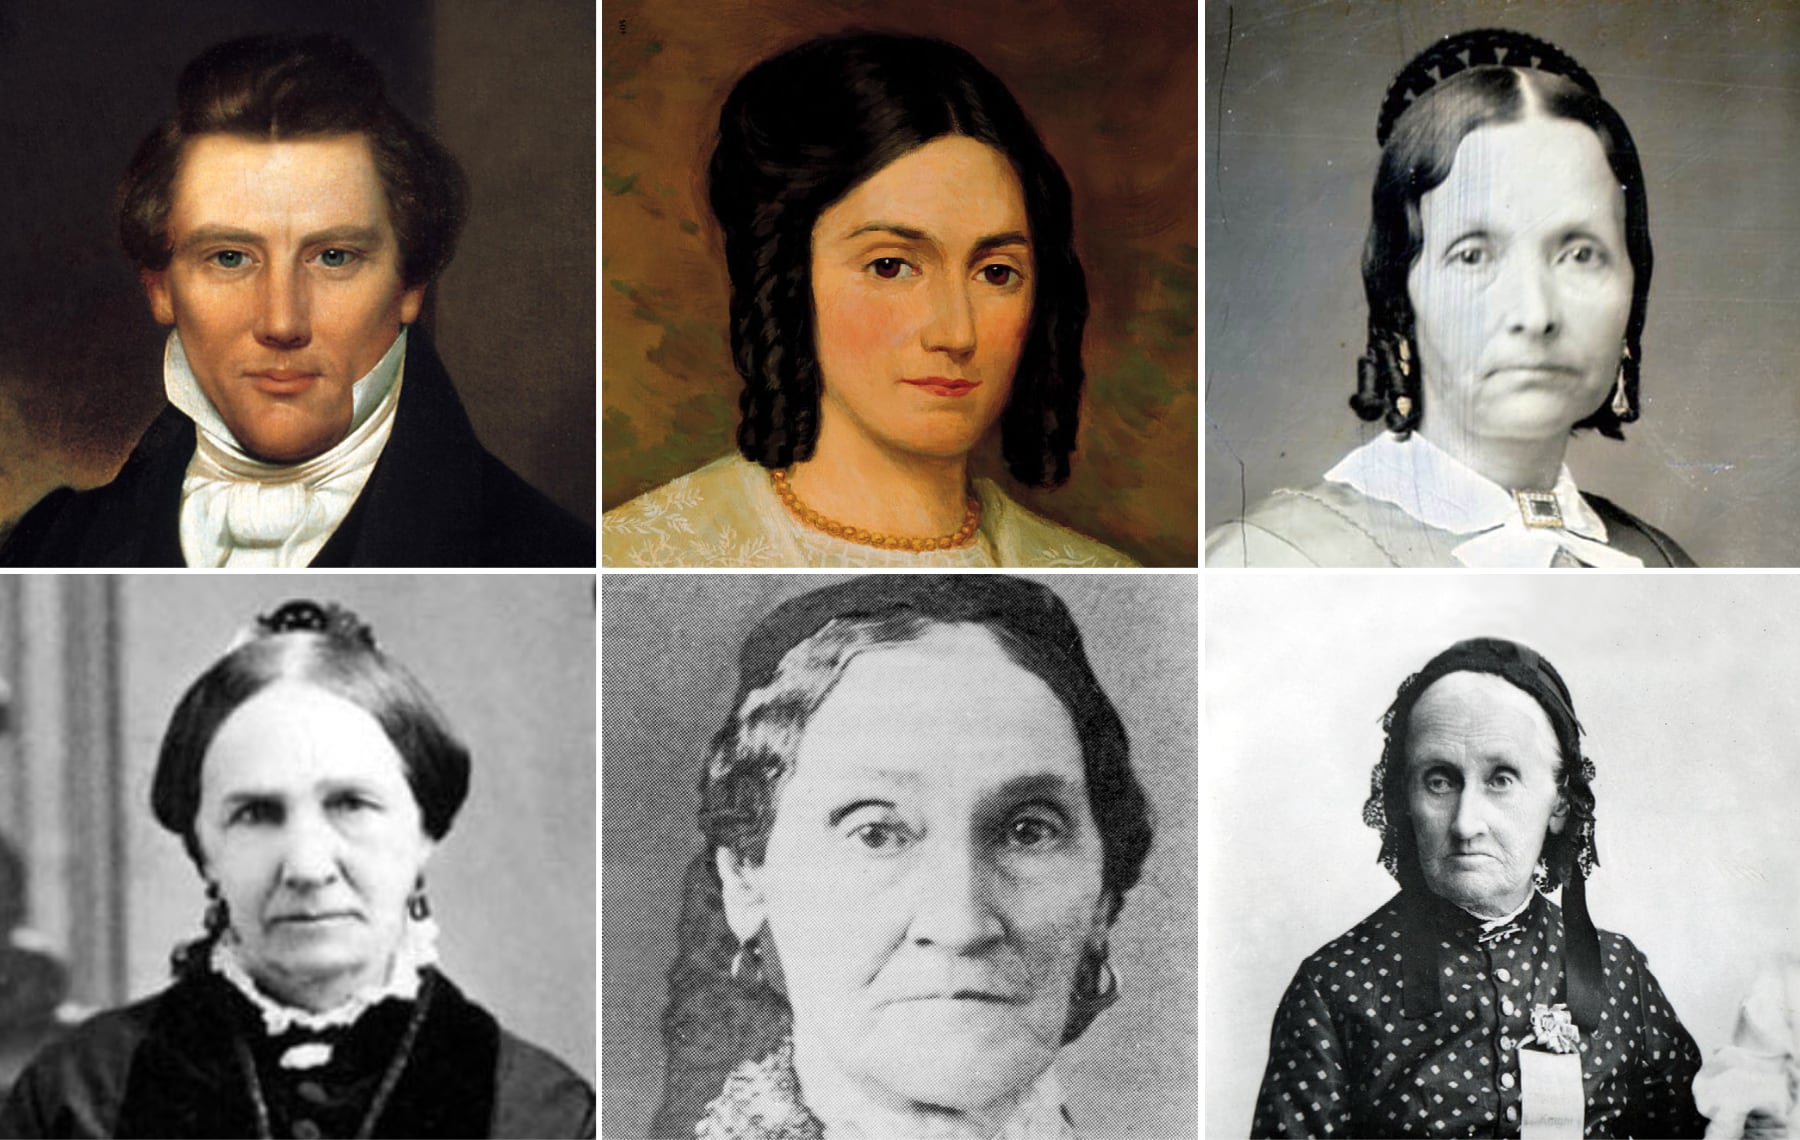 Joseph Smith, top left, and some of his purported wives, clockwise from top middle: first wife Emma Hale Smith; Eliza R. Snow; Martha McBride (Knight Smith Kimball); Marinda Nancy Johnson (Hyde Smith); and Zina Diantha Huntington Jacobs (Smith Young).